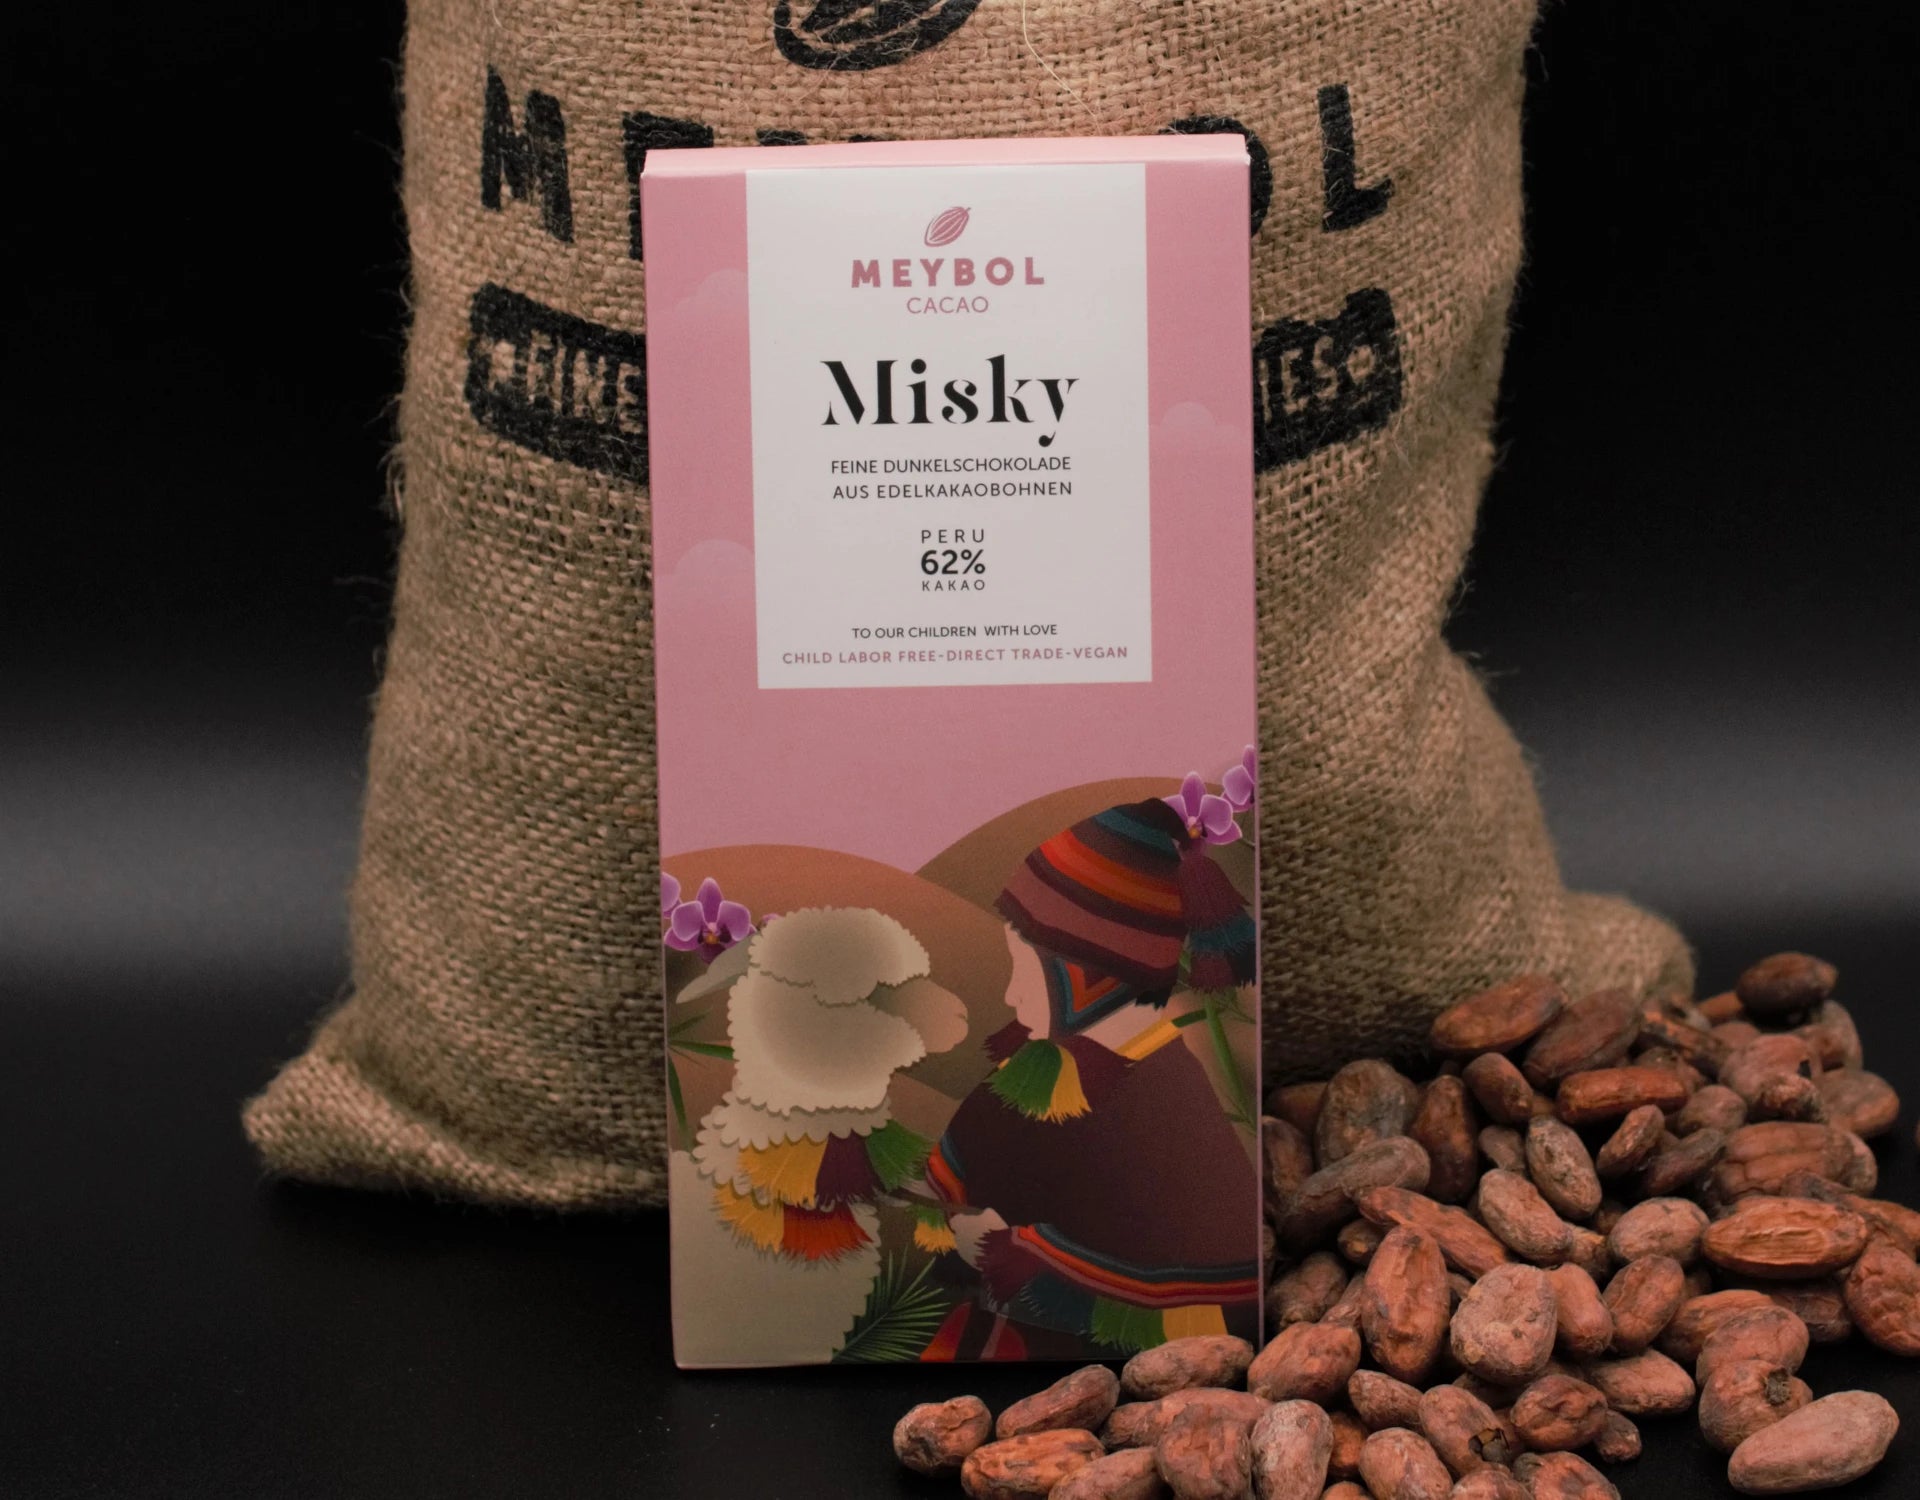 Meybol Cacao - Misky 62% | Best Chocolate in the World